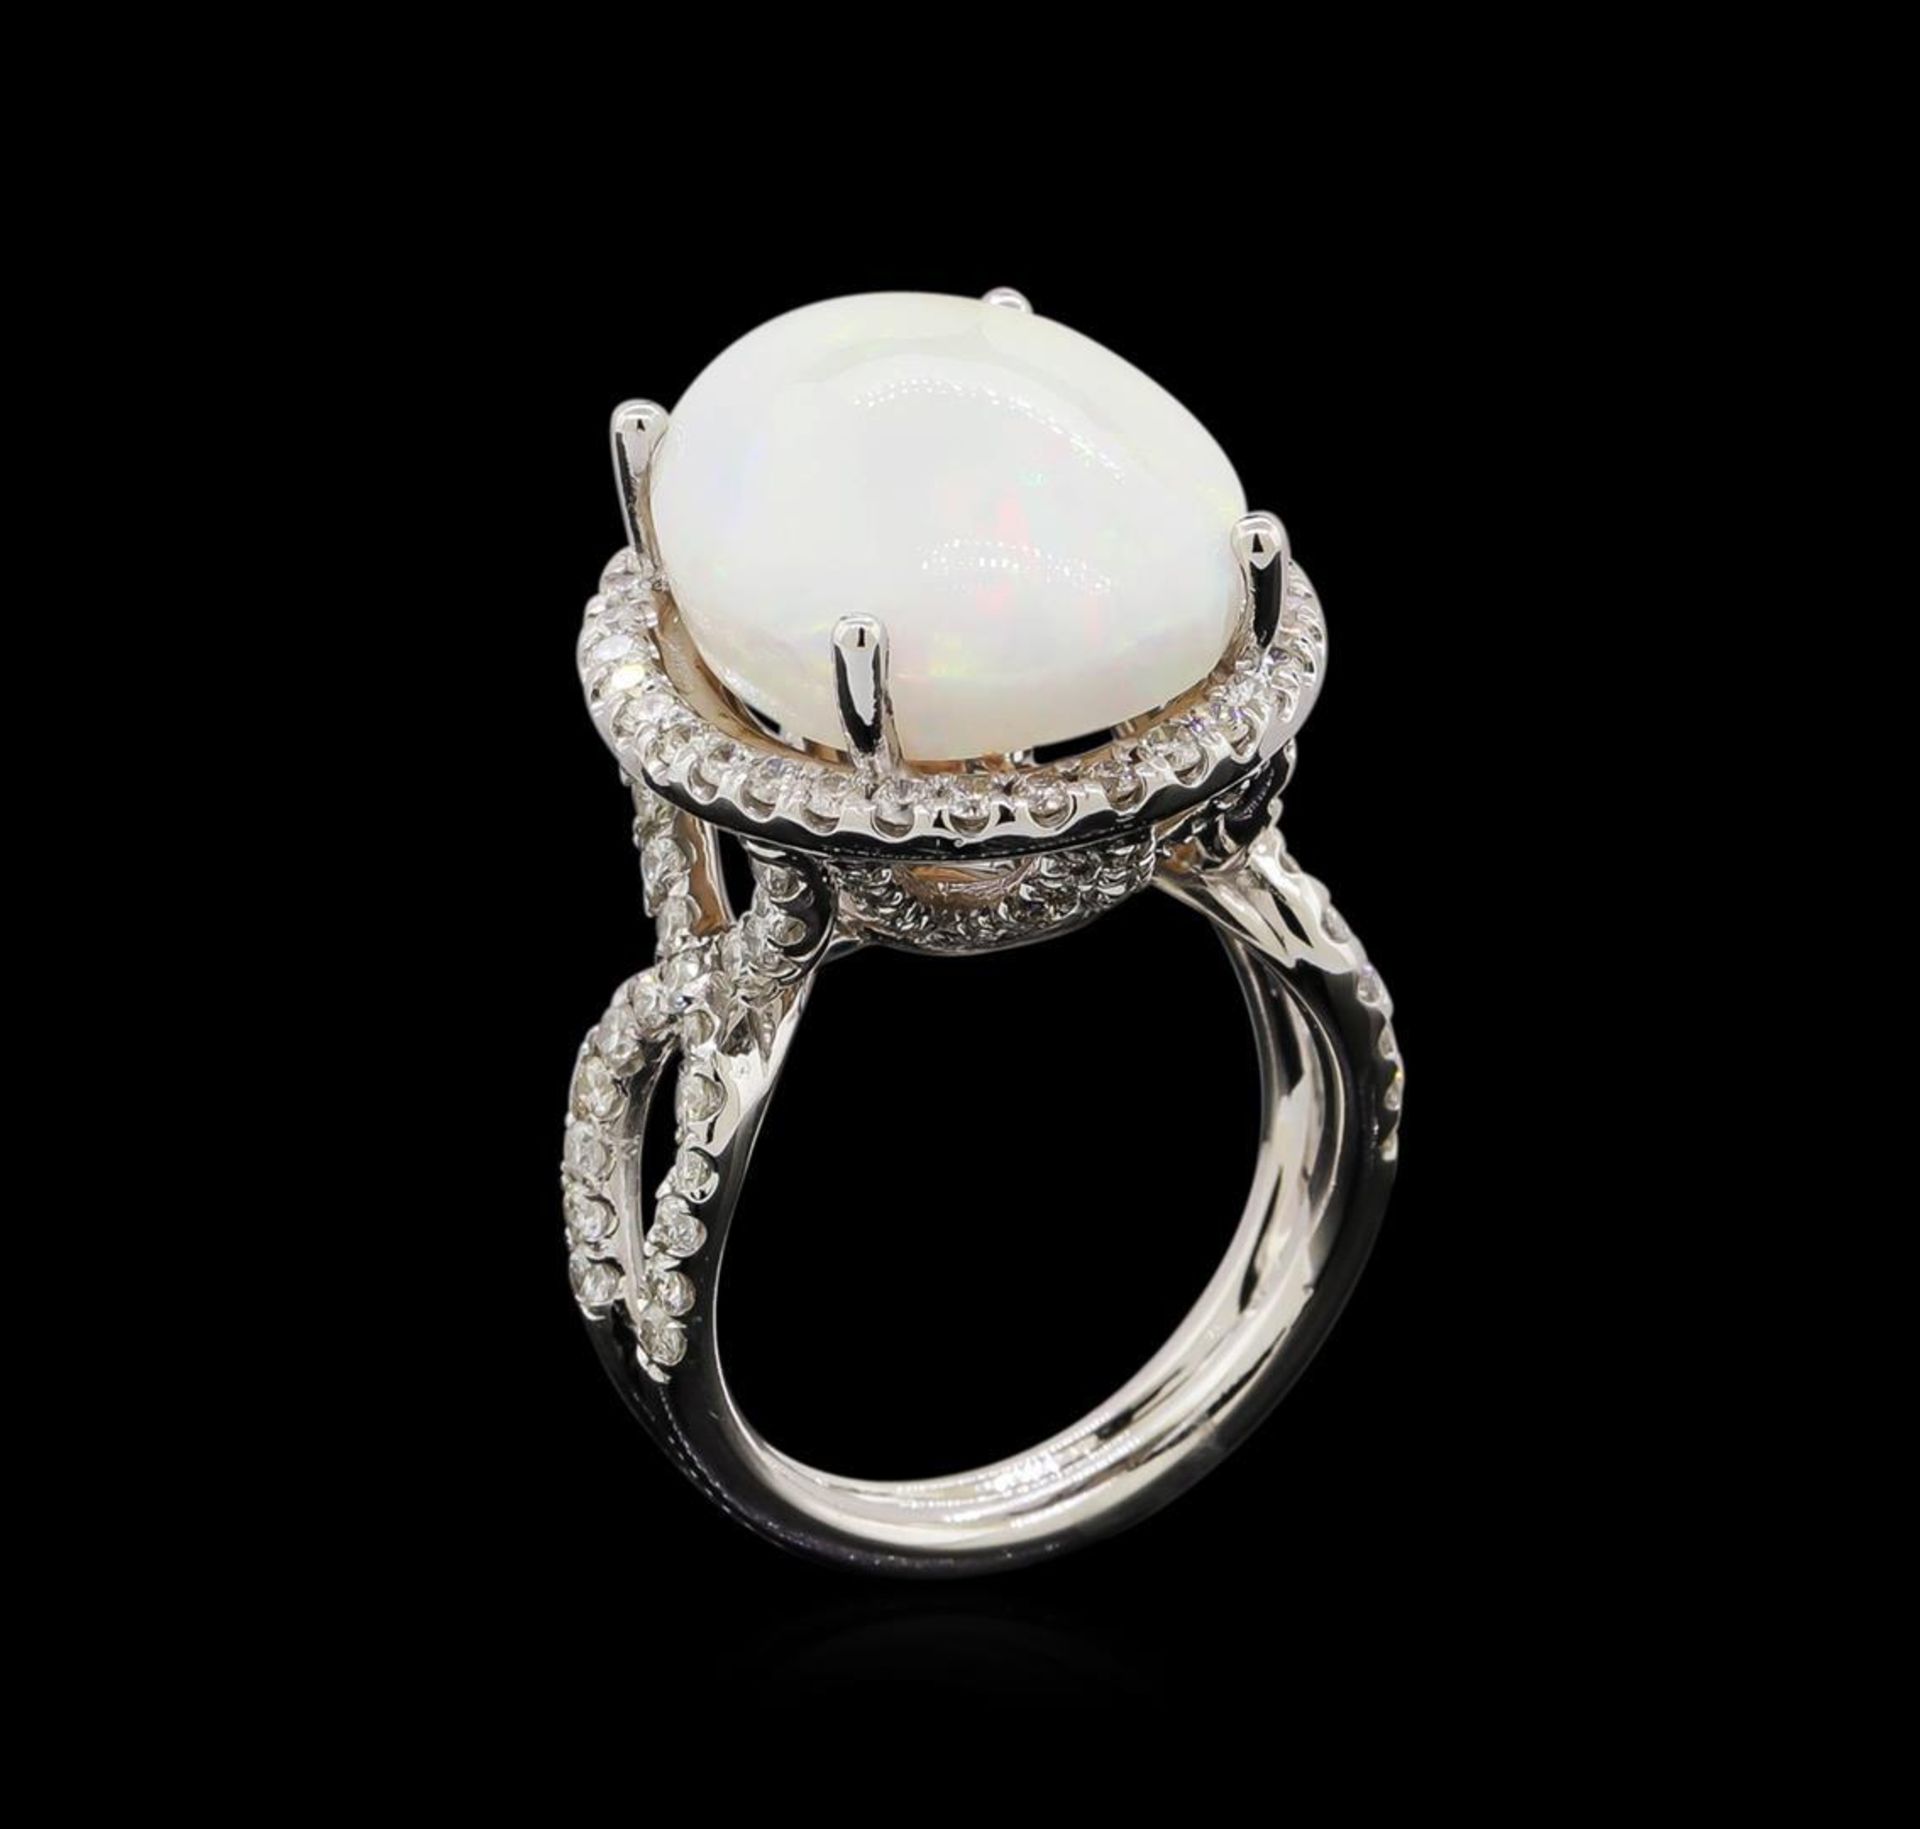 9.20 ctw Opal and Diamond Ring - 14KT White Gold - Image 4 of 5